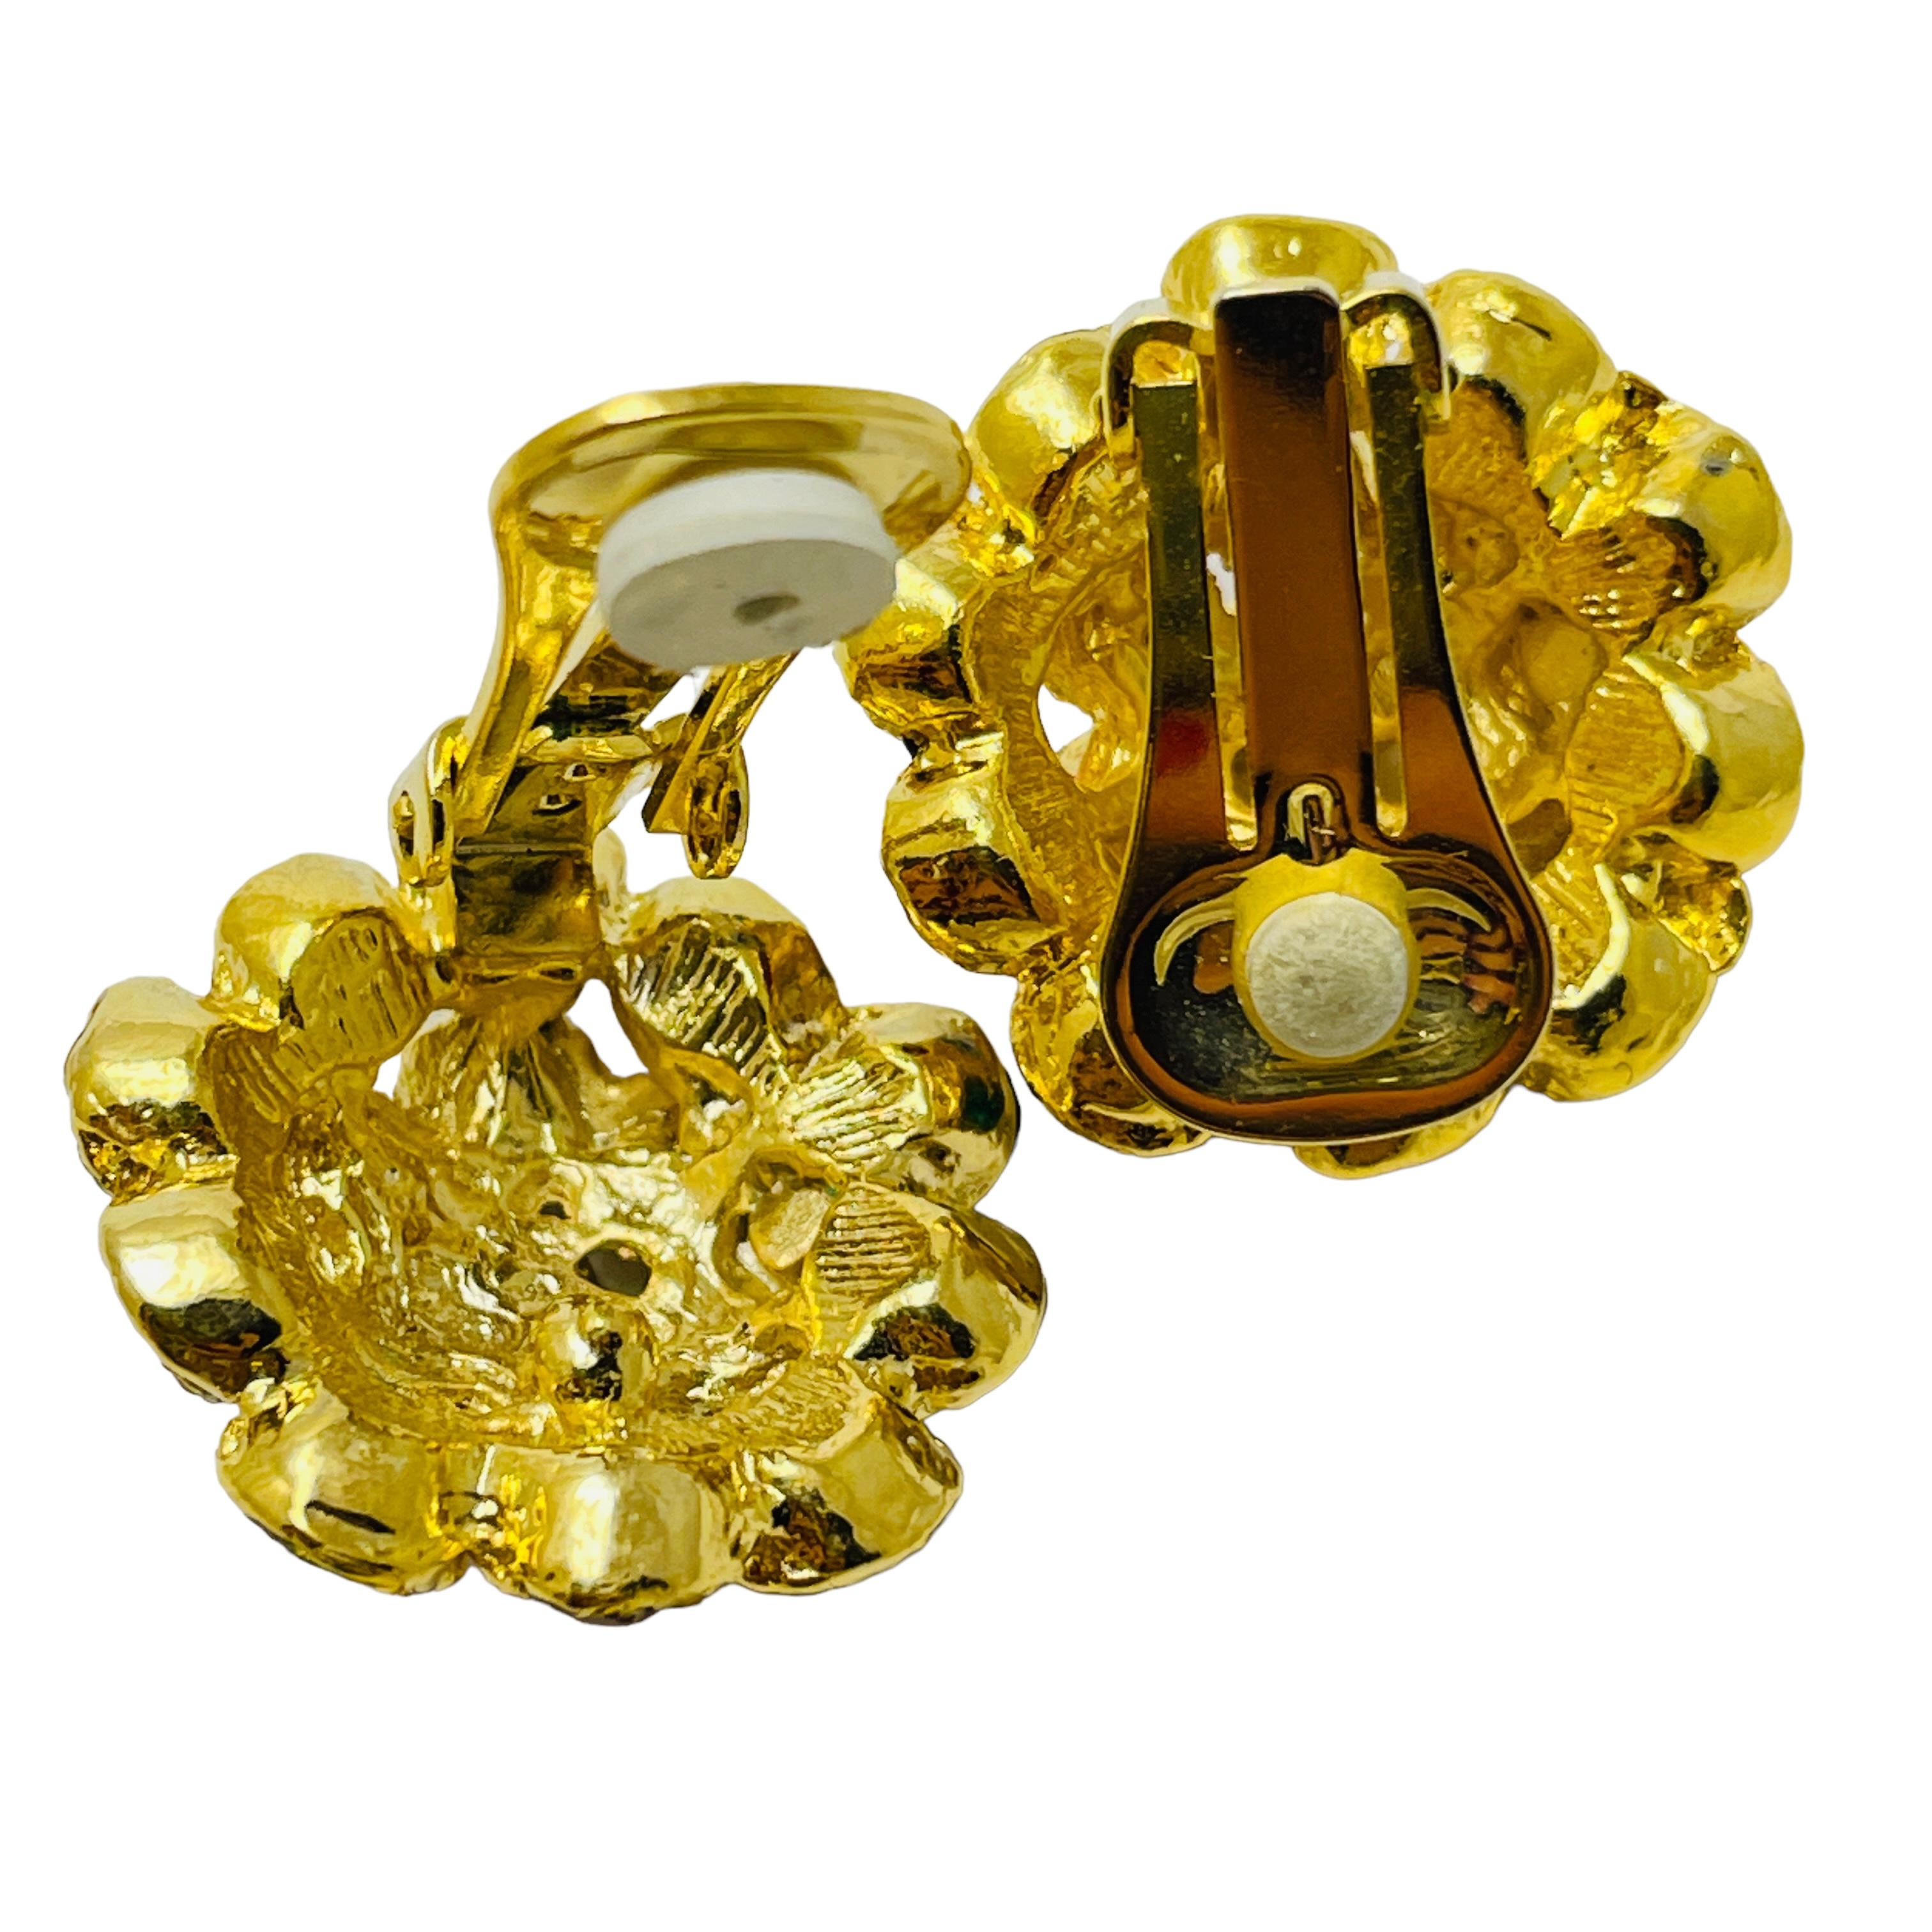 Vintage gold jewel moghul designer runway clip on earrings In Good Condition For Sale In Palos Hills, IL